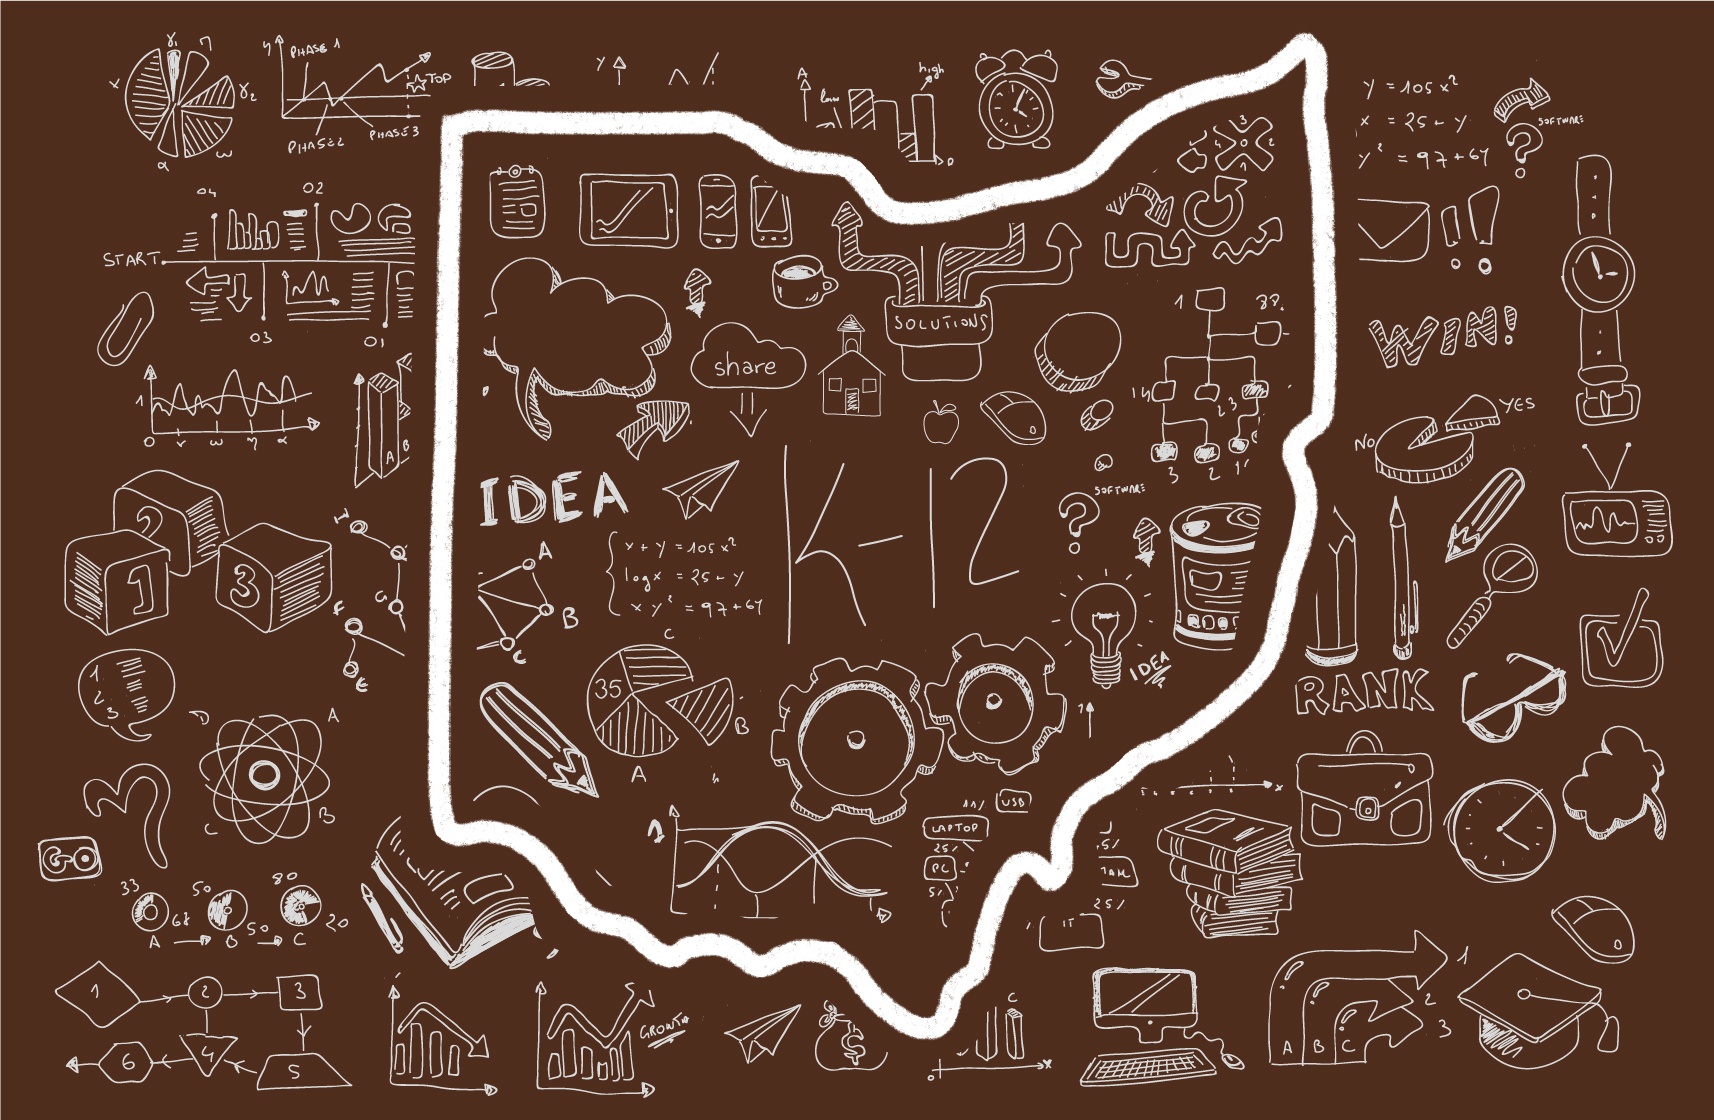 Graphic of sketched educational related images surrounded by an outline of Ohio